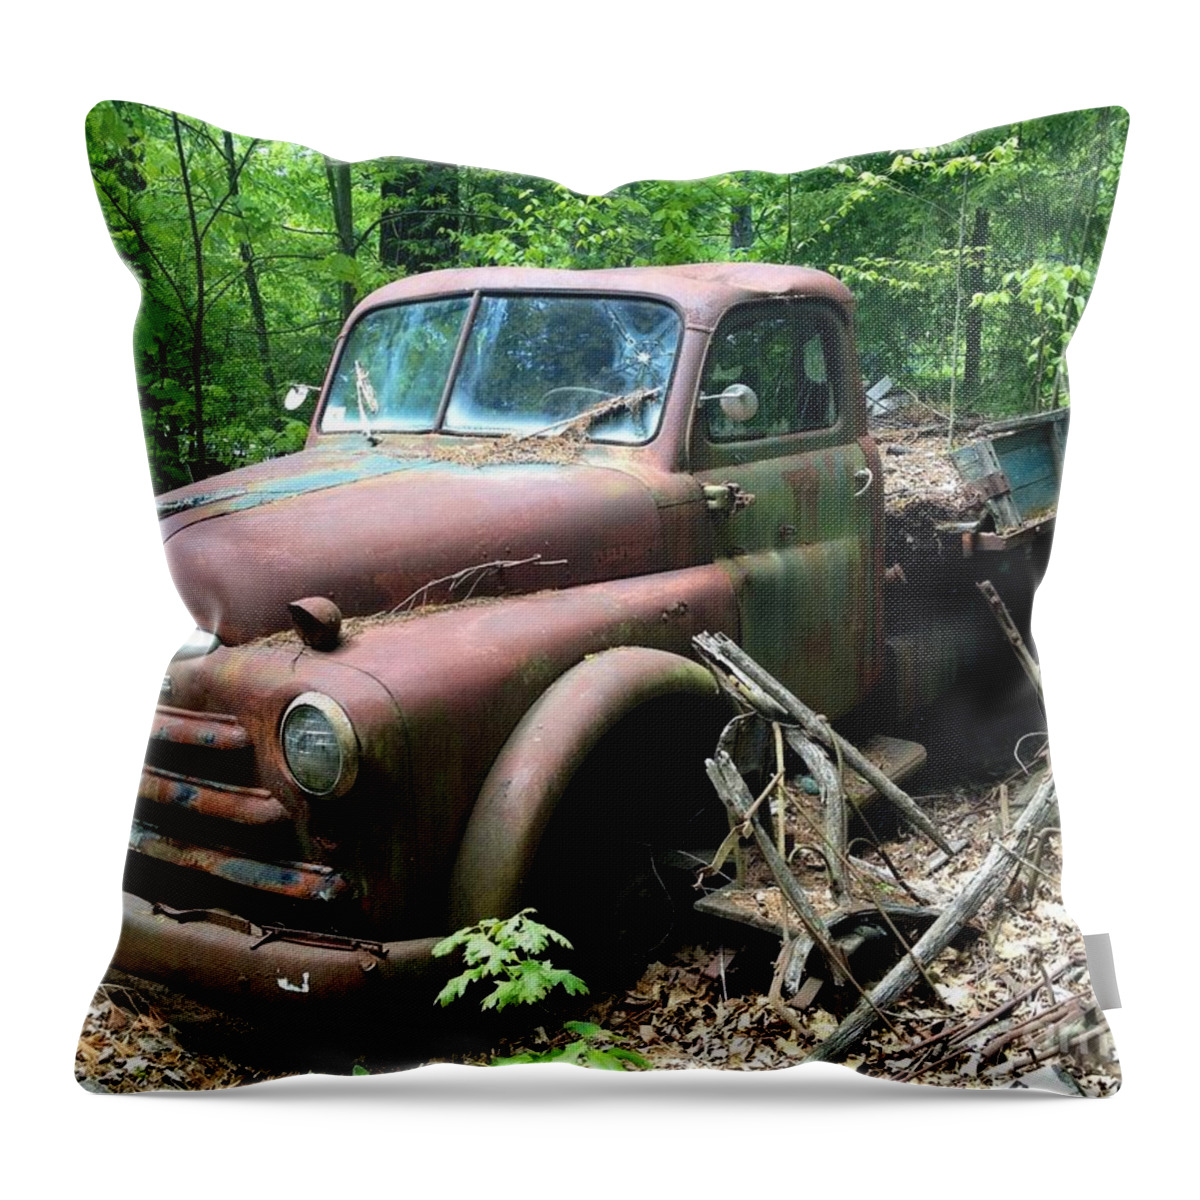 Rusted Throw Pillow featuring the photograph Abandoned by Jim Gillen